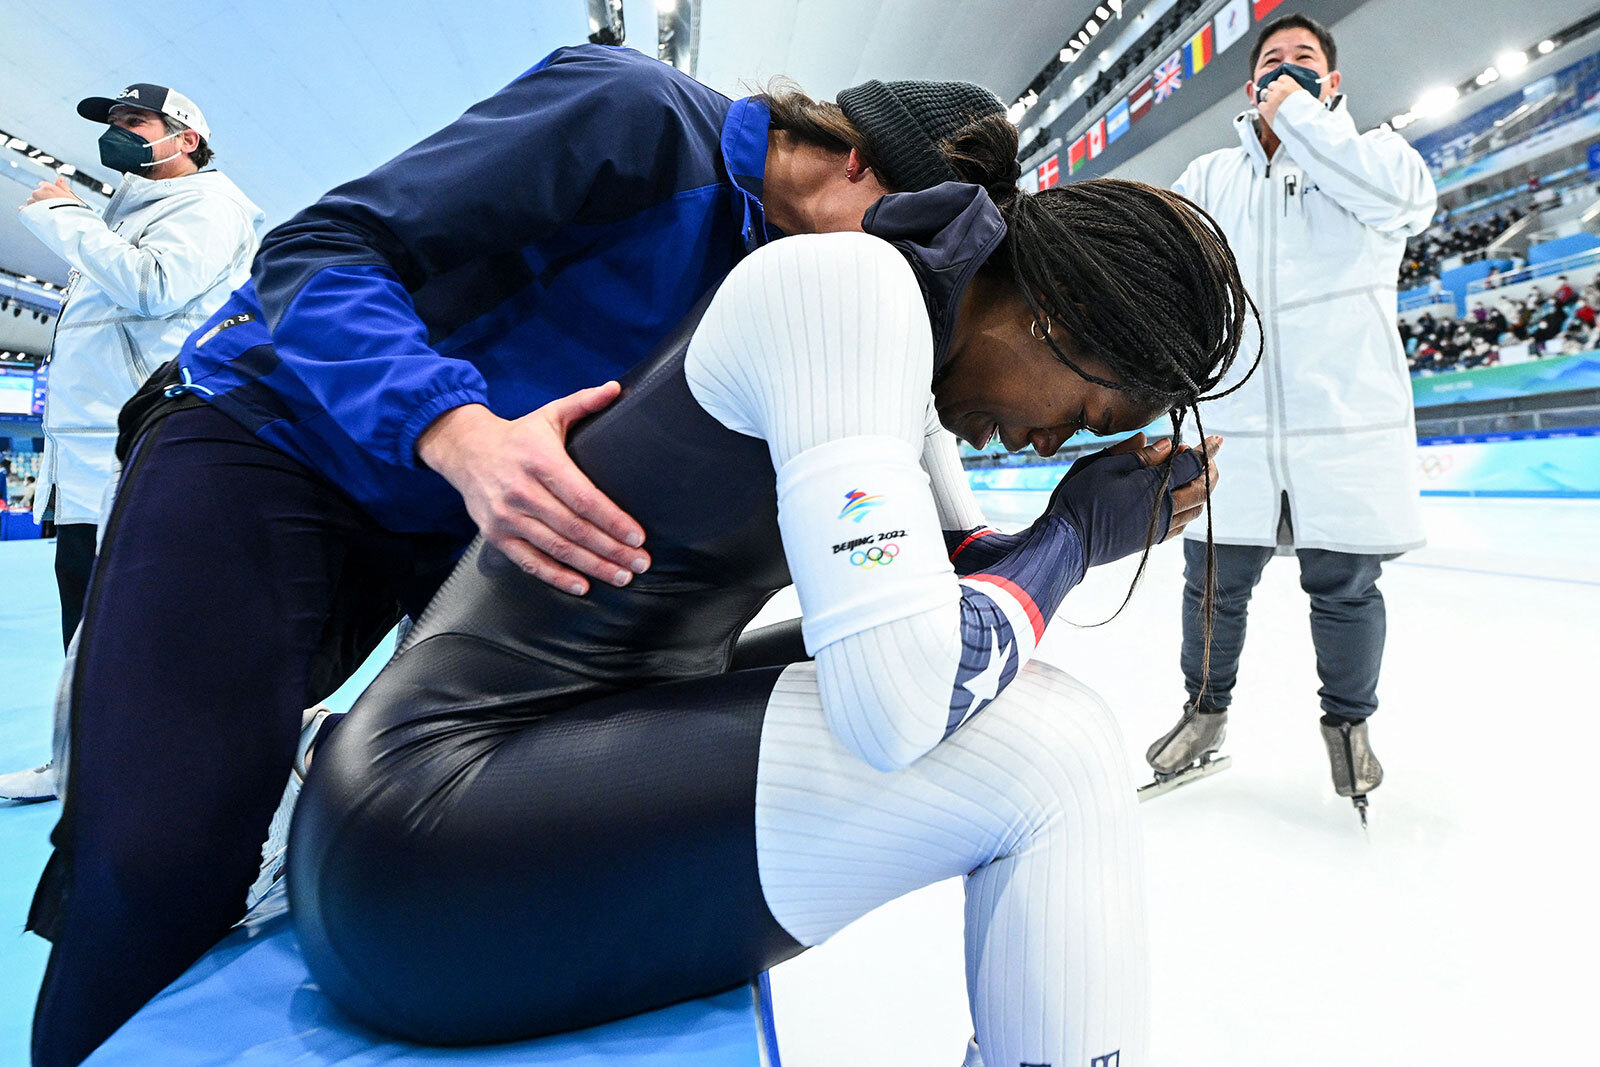 American Erin Jackson celebrates gold in the women's 500m speed skating event on February 13. Jackson is the first Black woman to win an individual Olympic medal in speed skating, according to Team USA.